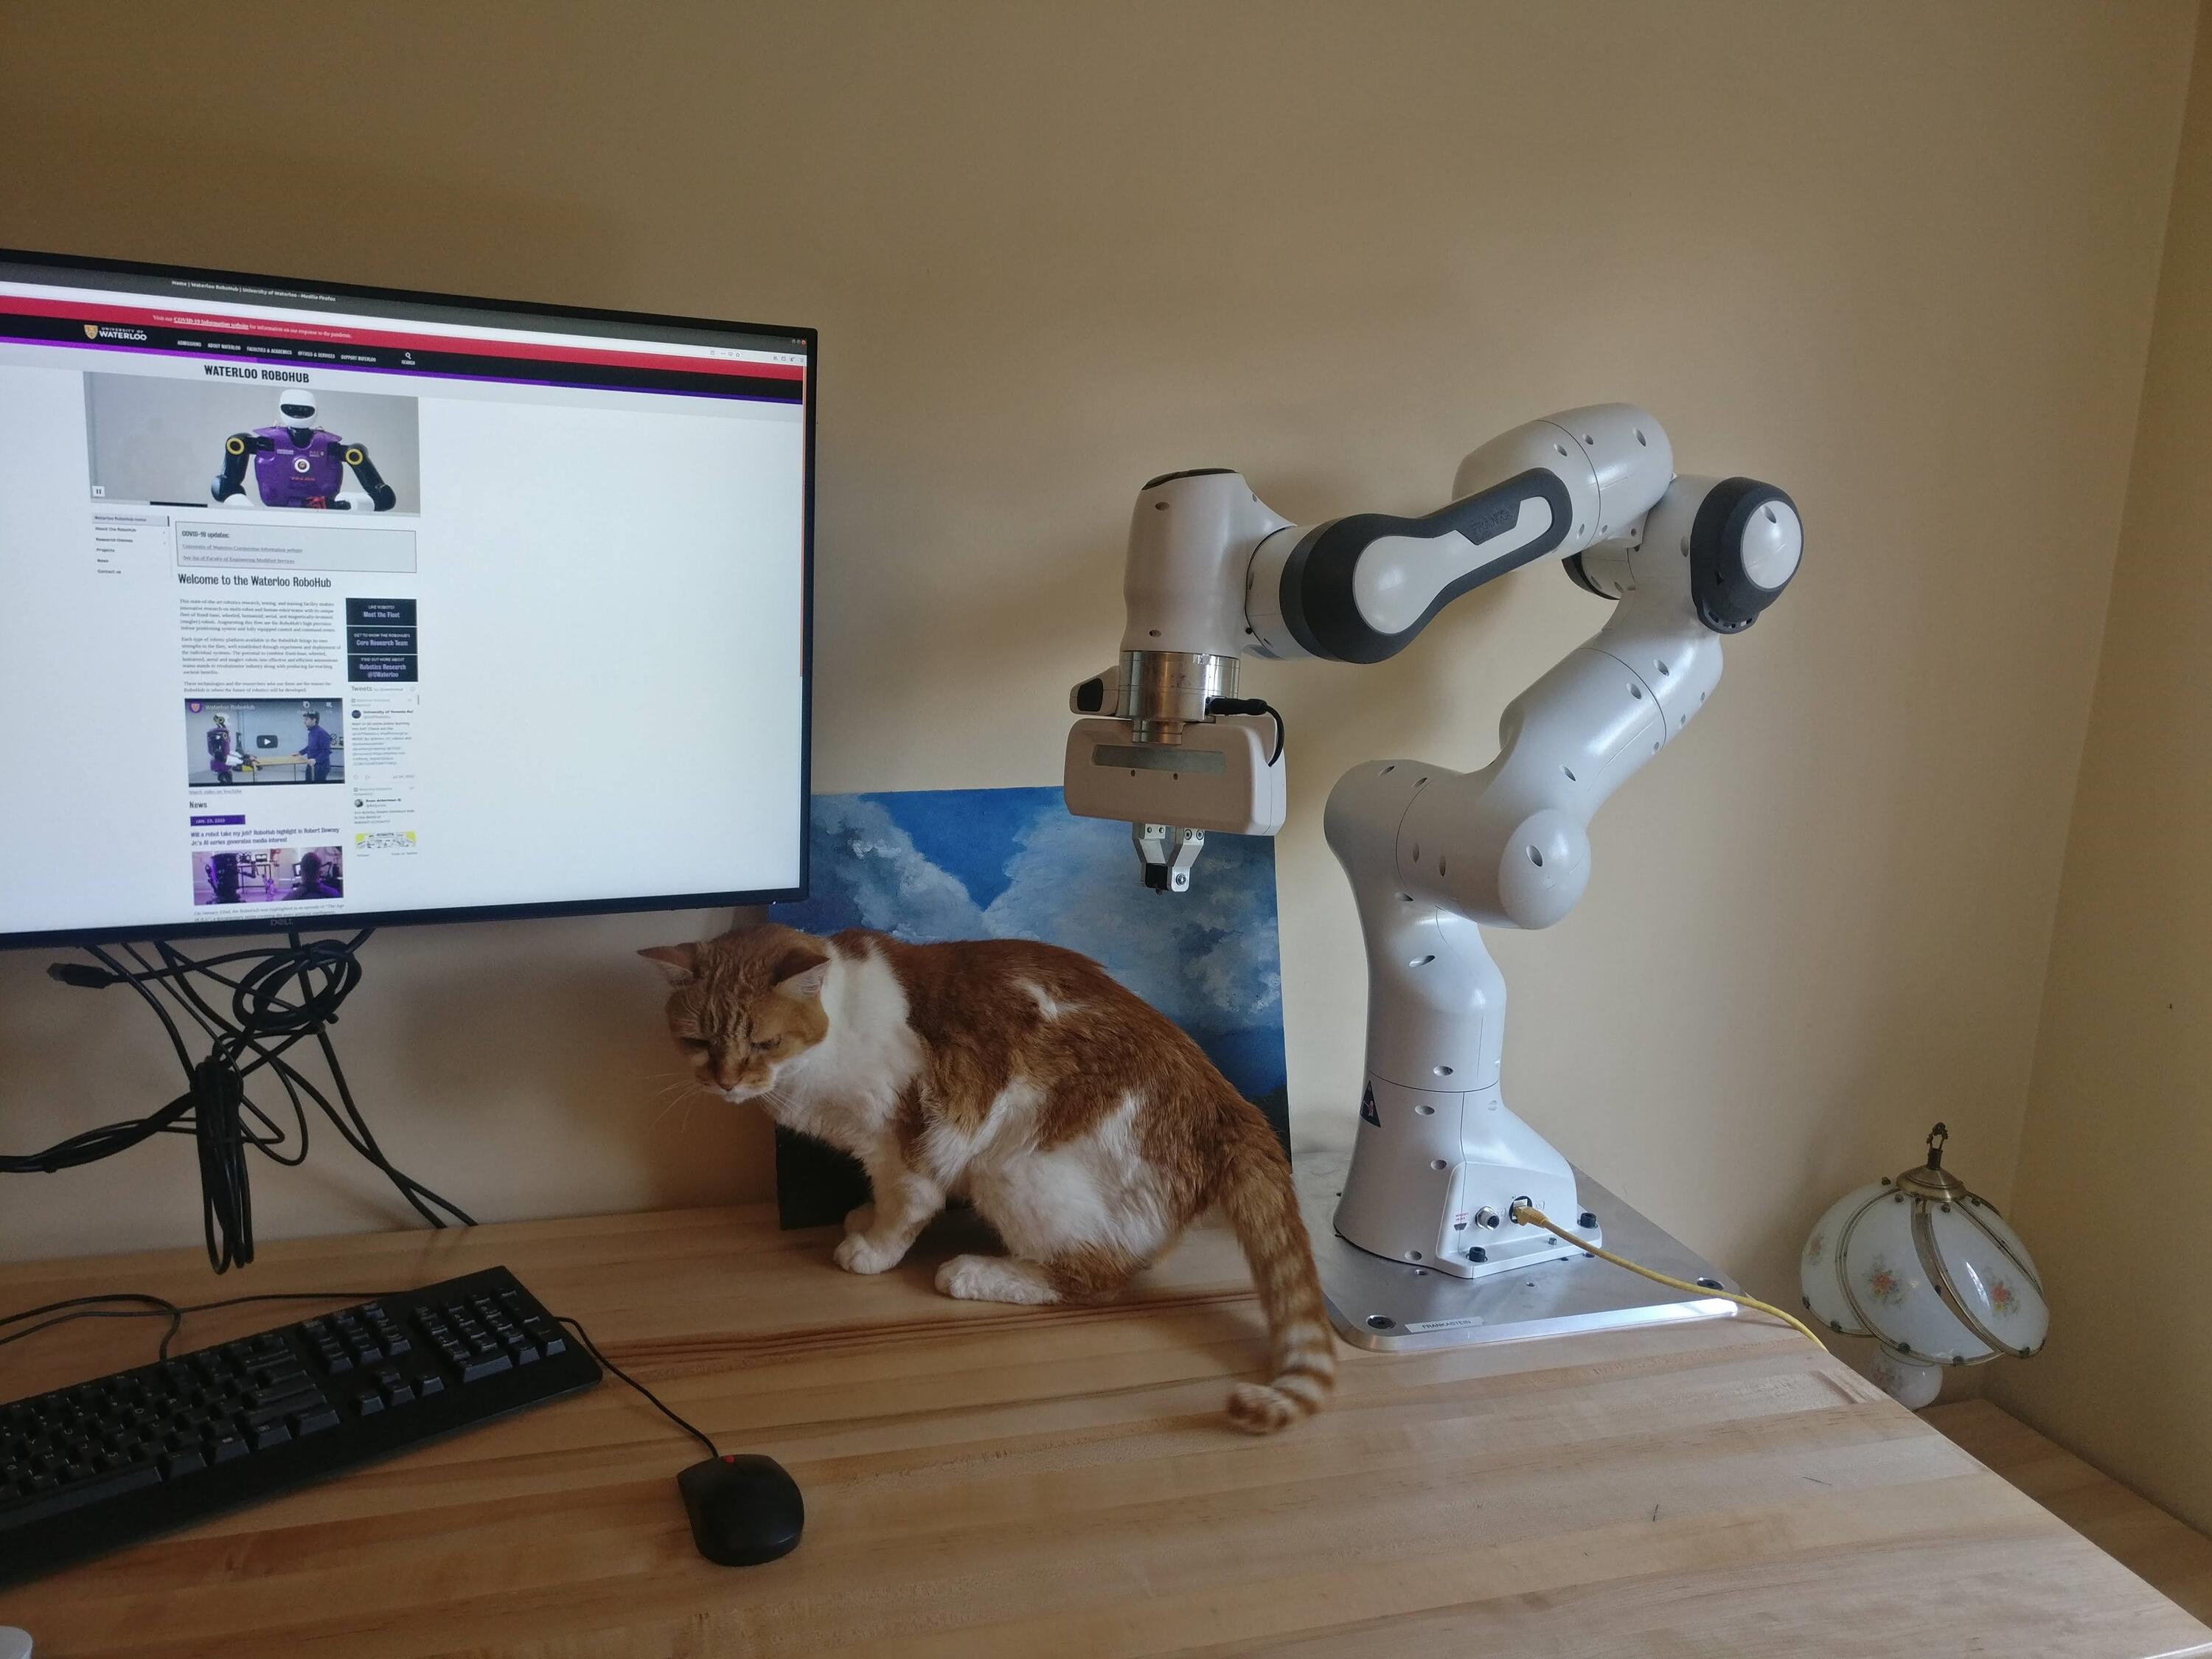 Vladimir Joukov's family cat looking for a backrub from the robot he was loaned from the Robohub.